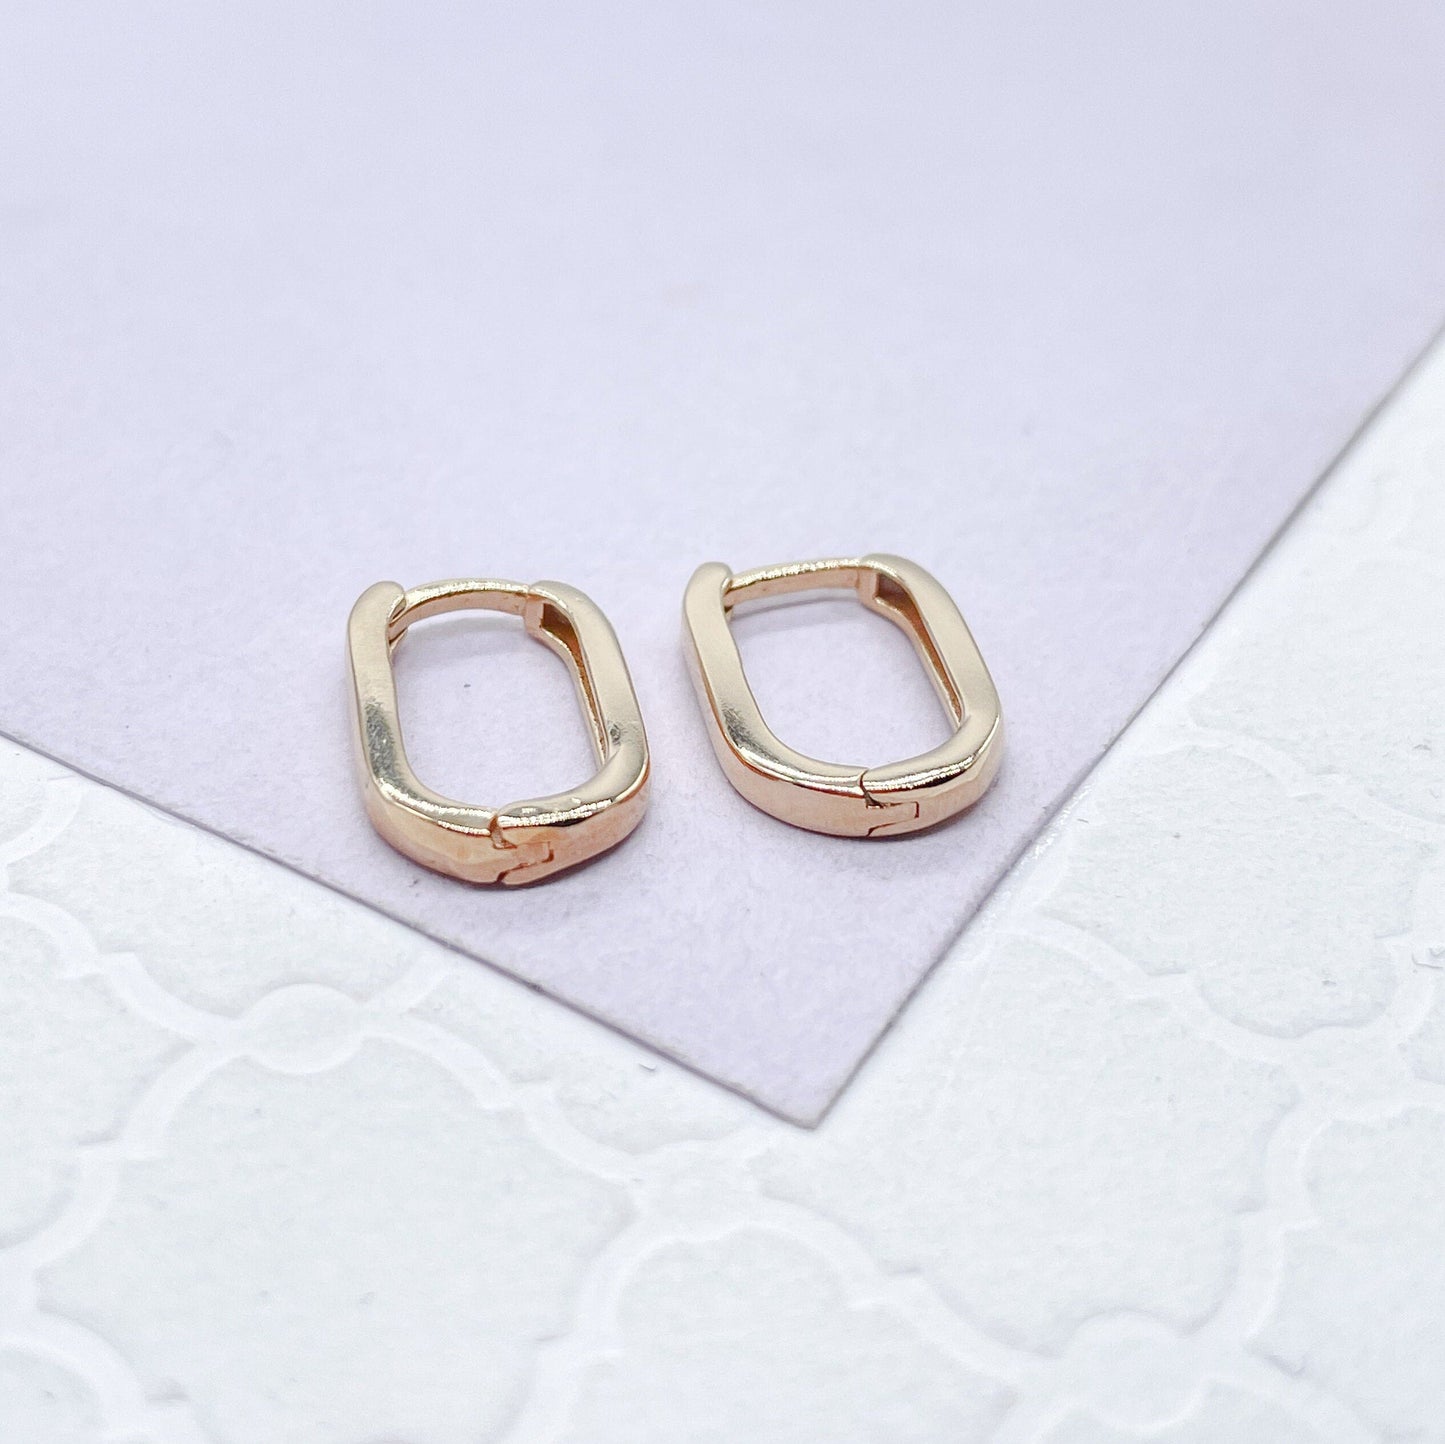 18k Gold Filled Thin Long Smooth Plain Earrings Paper Clip Link Hoops